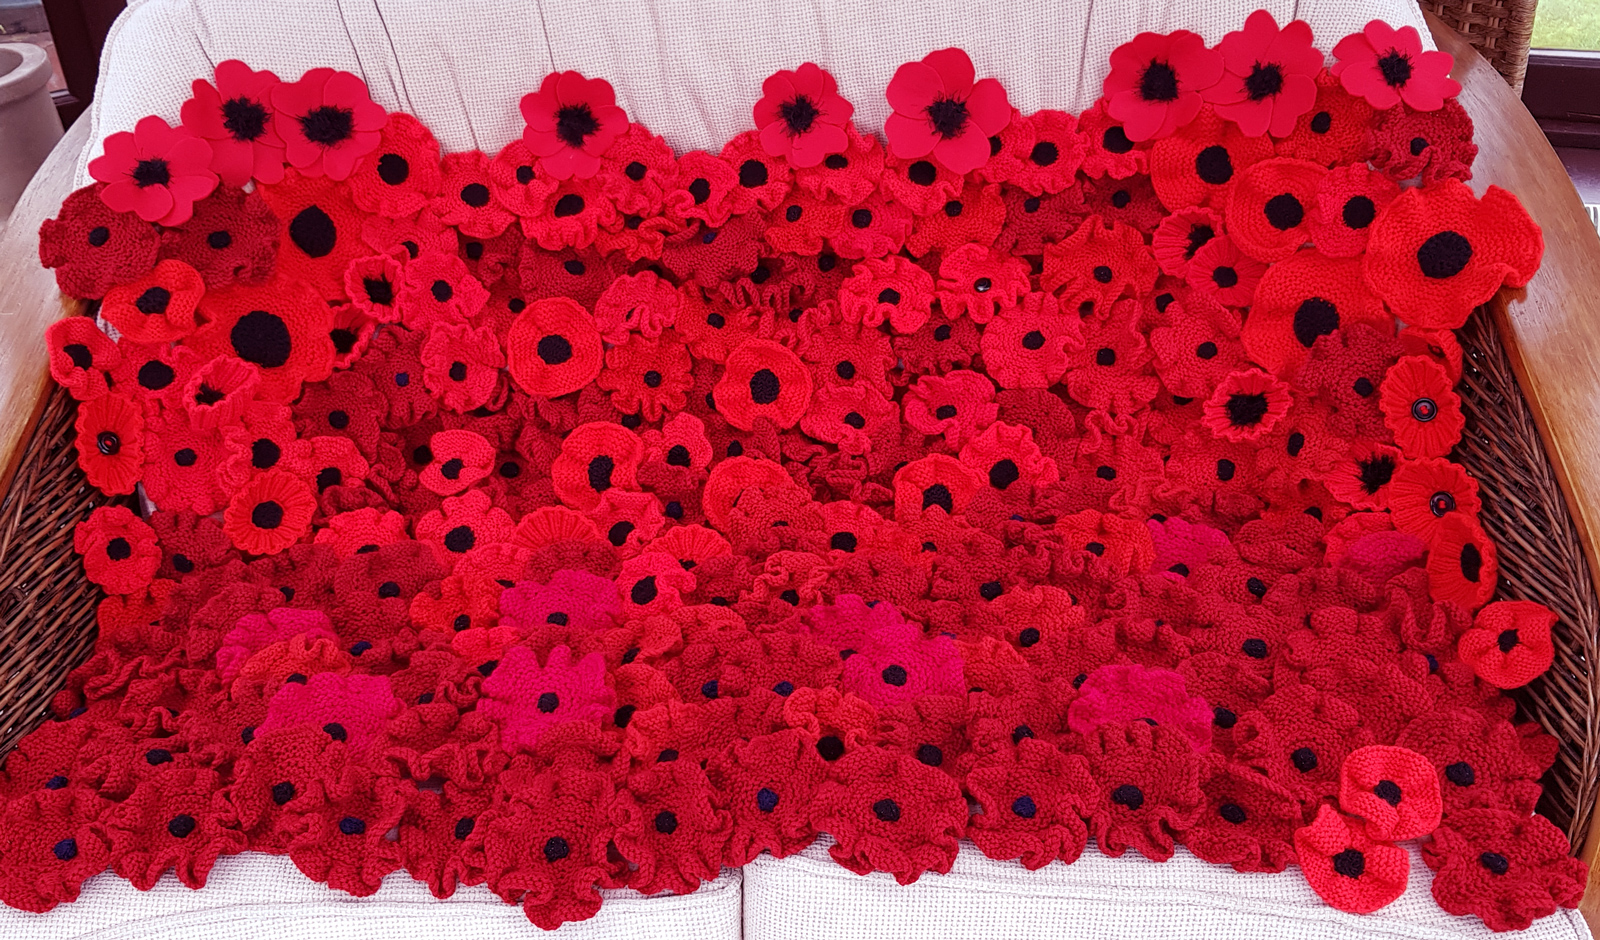 A beautiful blanket of poppies